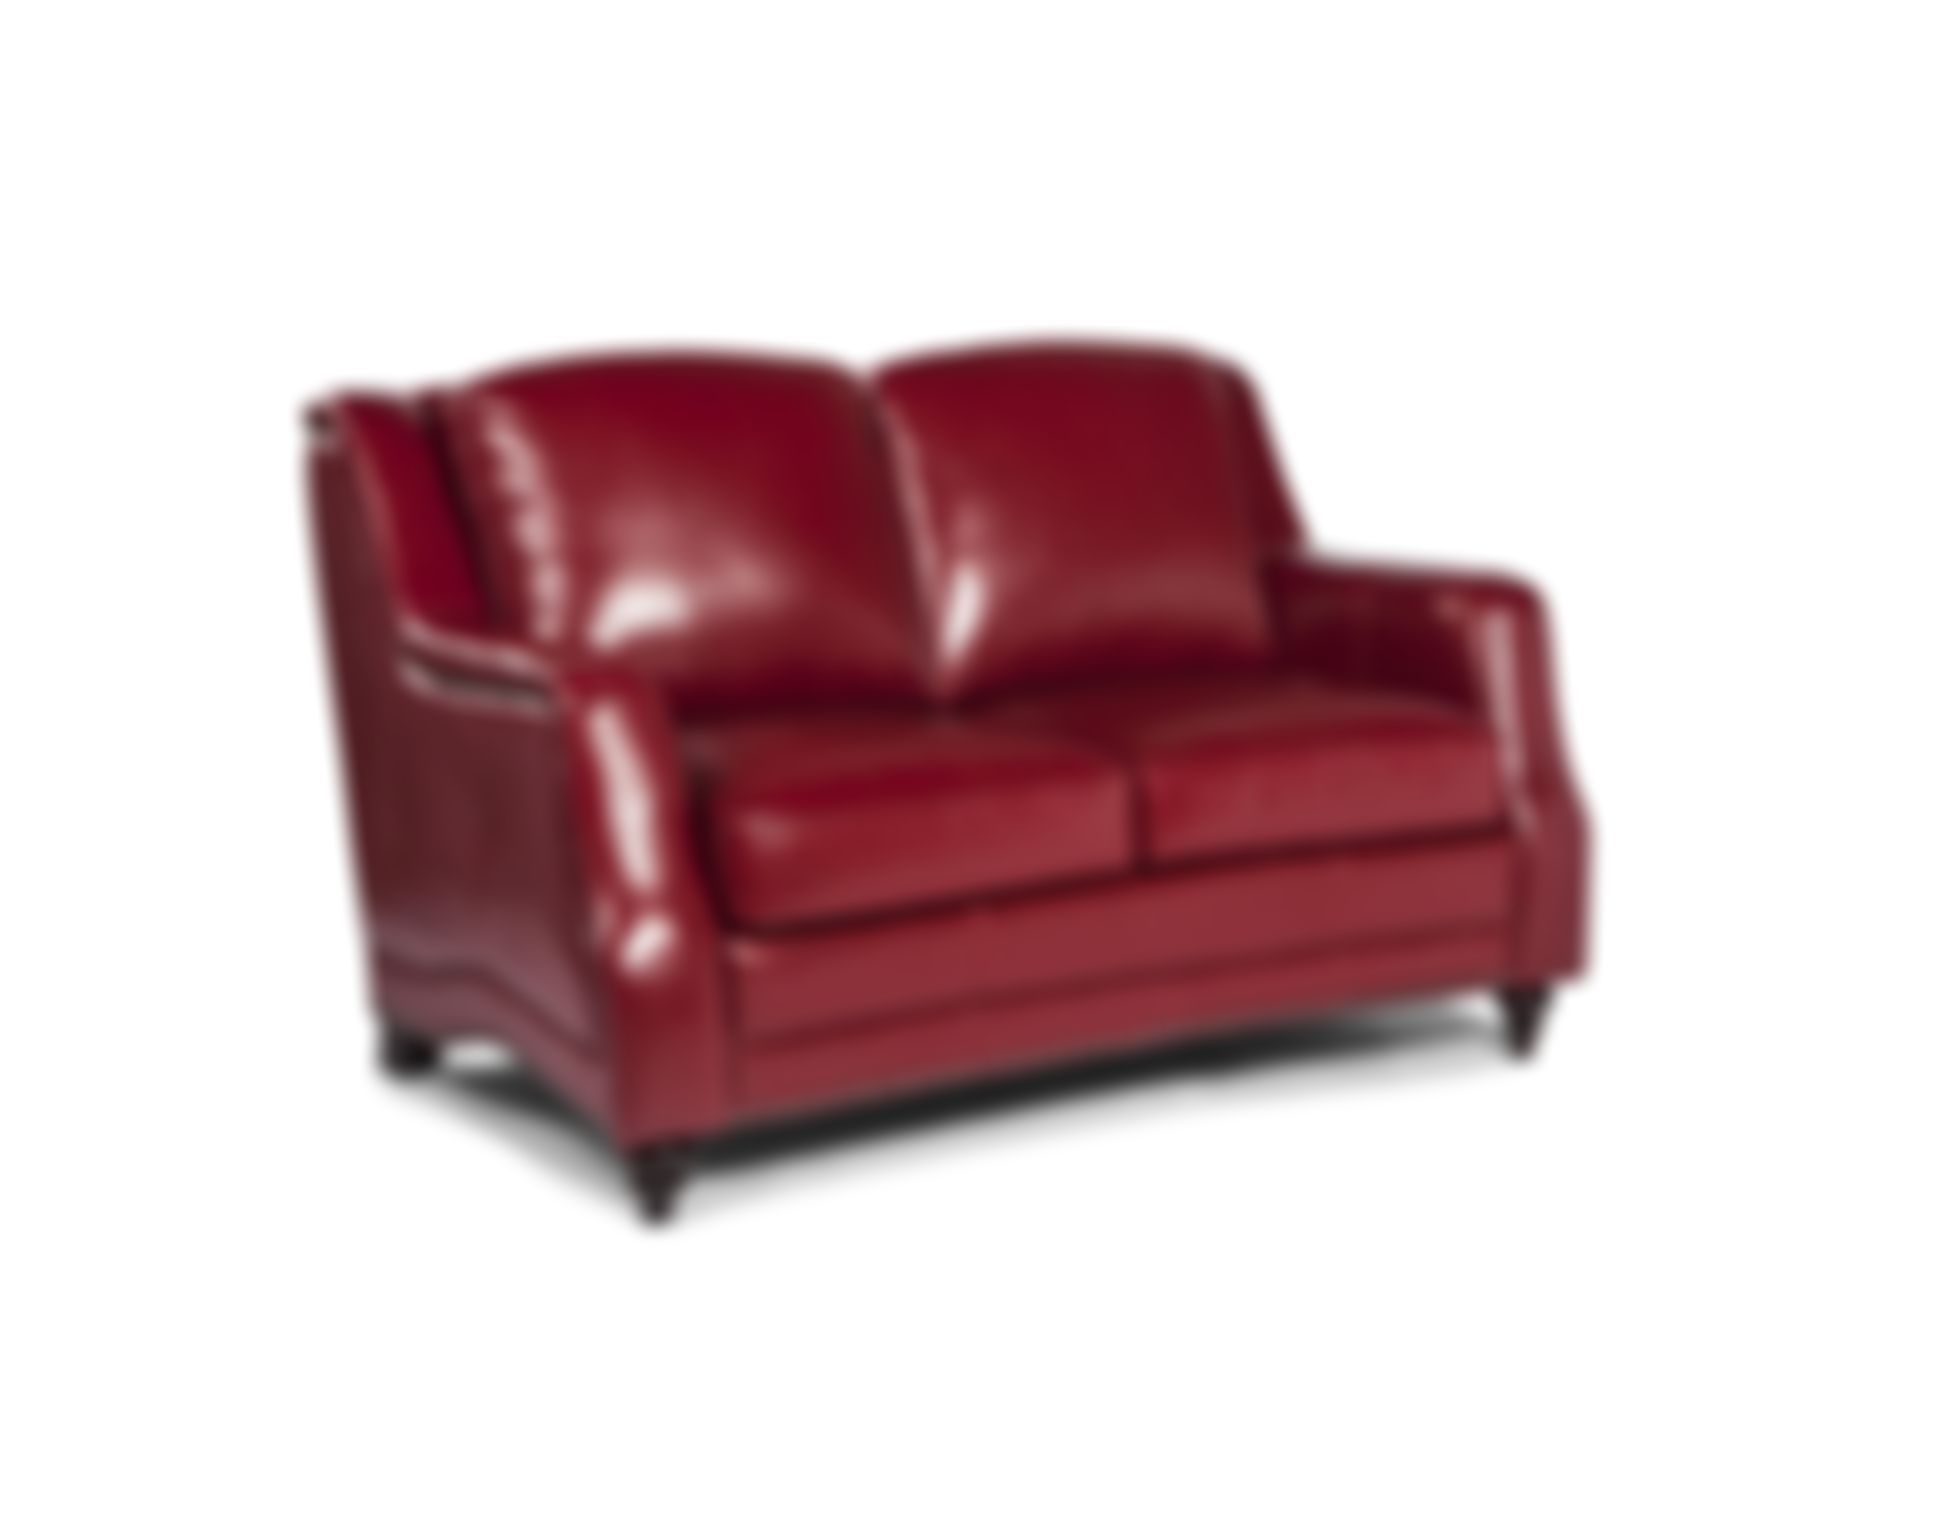 Victoria 1635 Leather Sofa In Berry Red, Red Leather Sofa Furniture Row